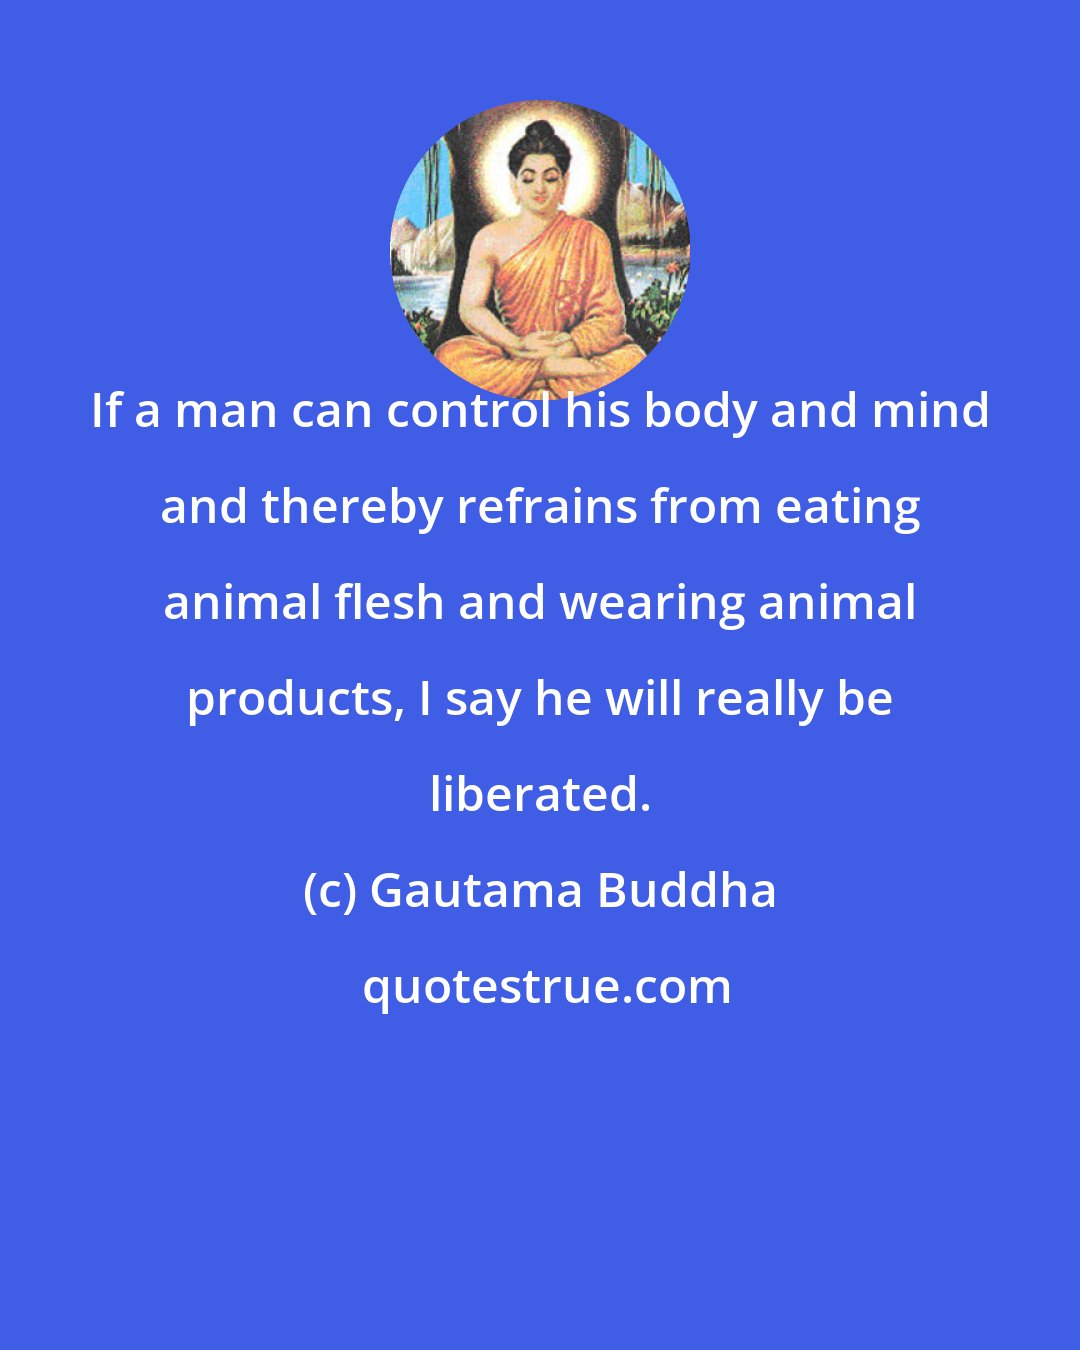 Gautama Buddha: If a man can control his body and mind and thereby refrains from eating animal flesh and wearing animal products, I say he will really be liberated.